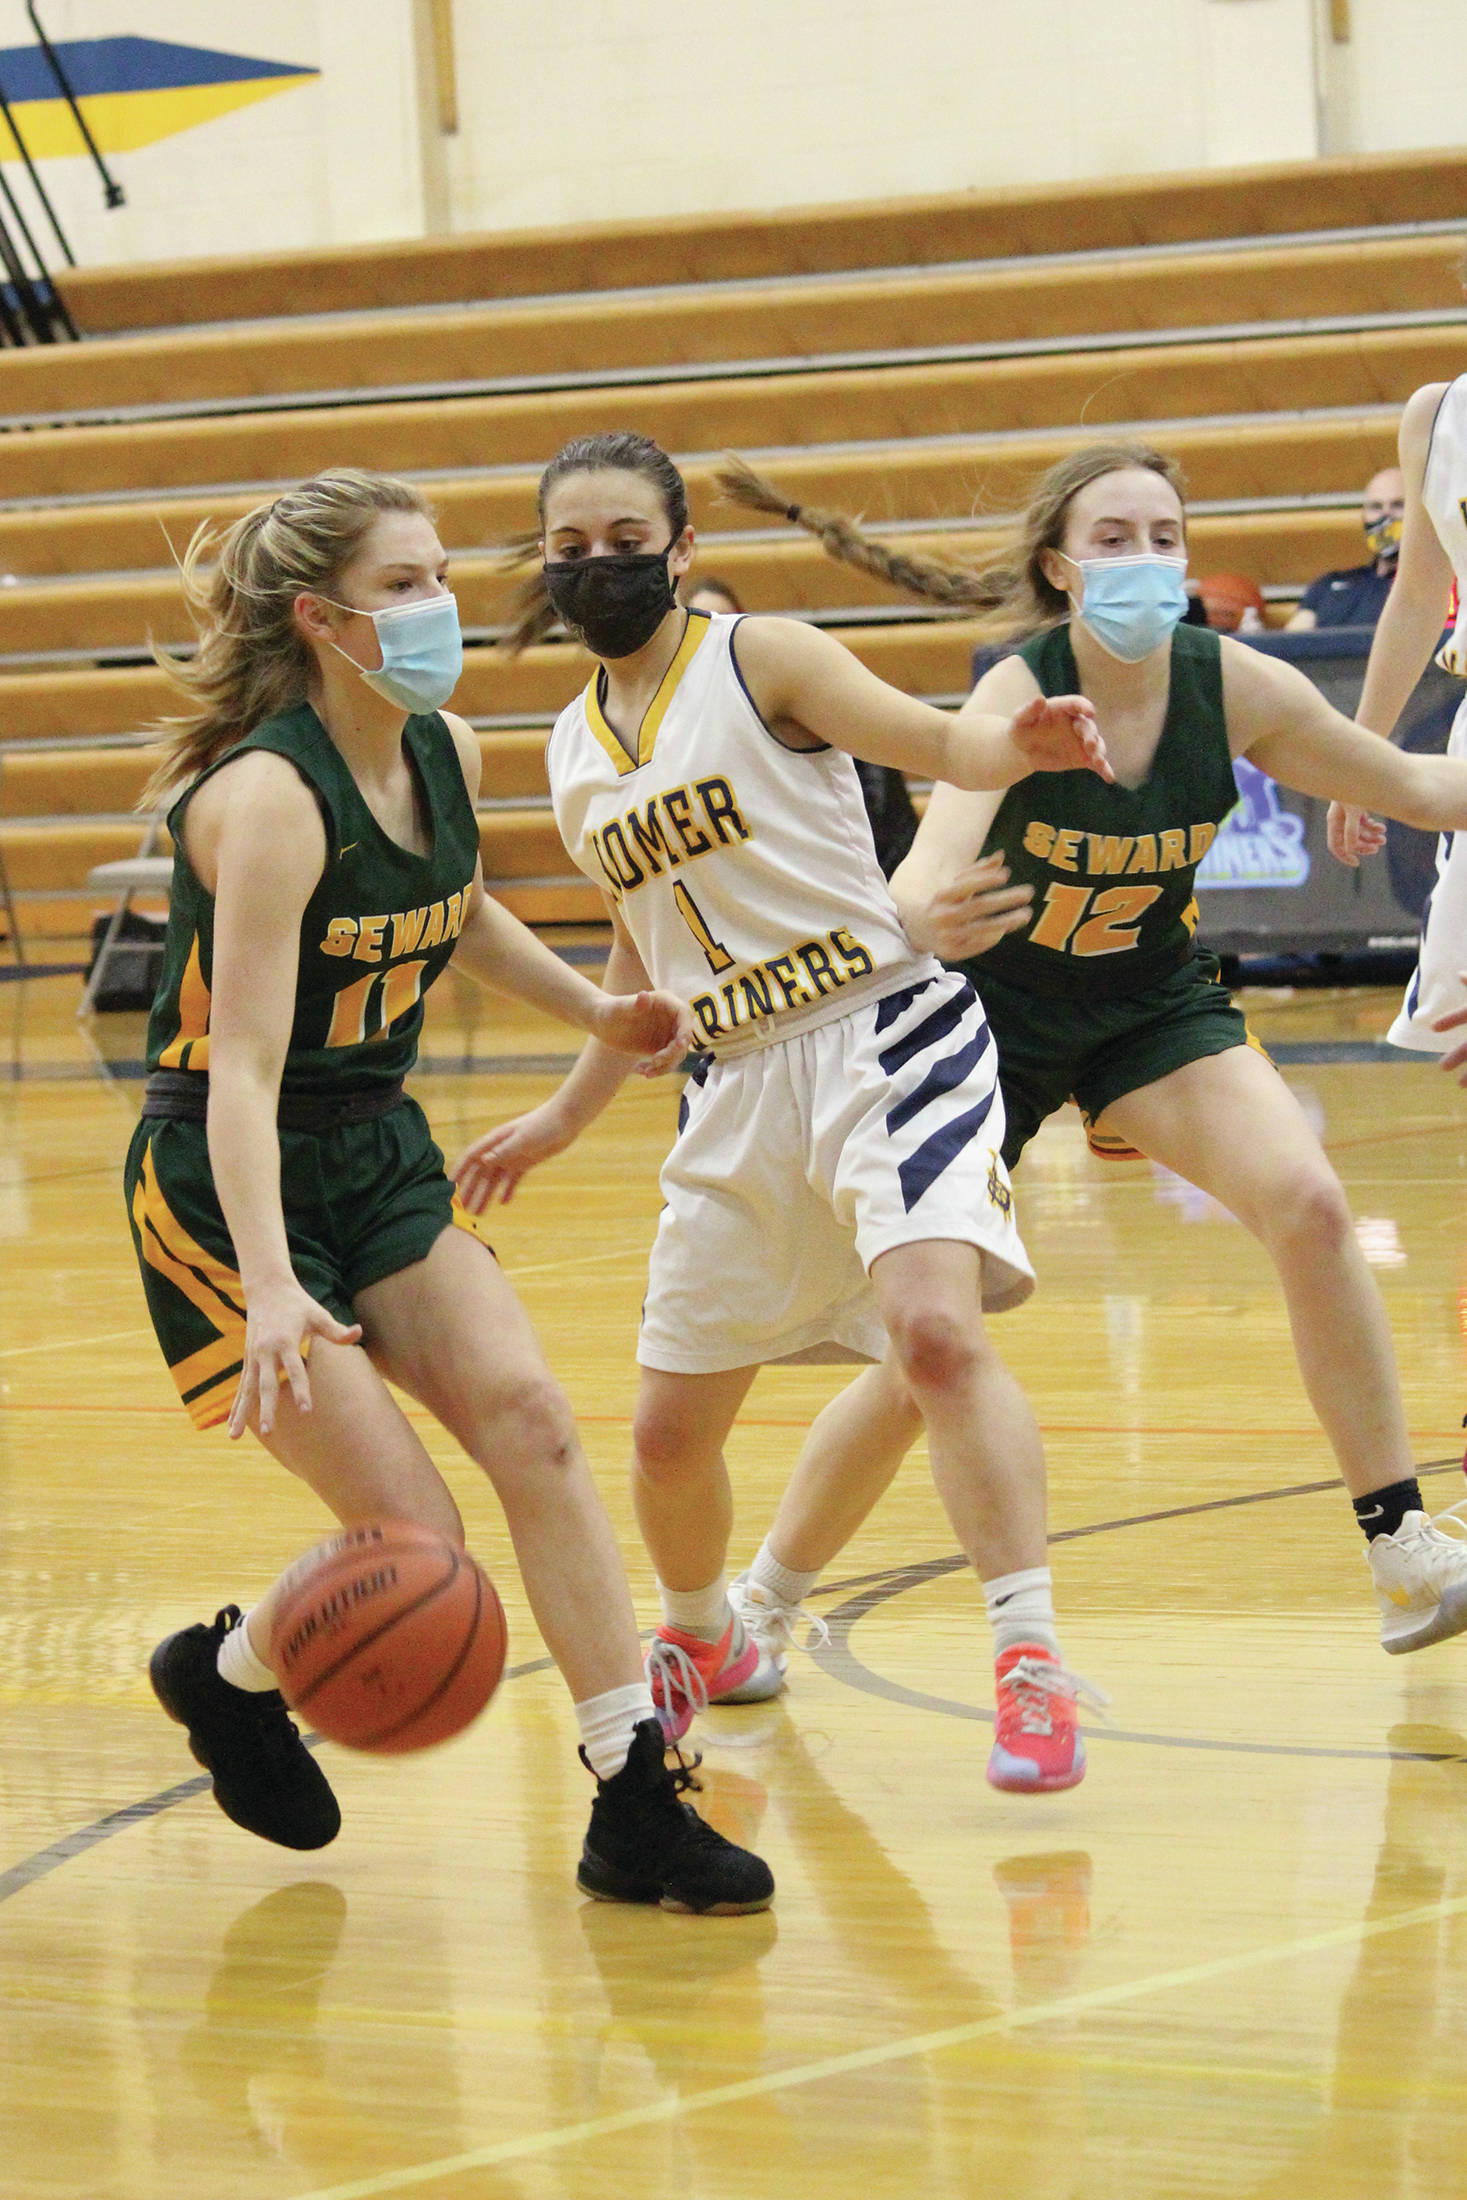 Seward’s Lena Jagielski brings the ball down the court under pressure from Homer’s Sailey Rhodes during a Saturday, Jan. 30, 2021 basketball game at the Alice Witte Gymnasium in Homer, Alaska. (Photo by Megan Pacer/Homer News)